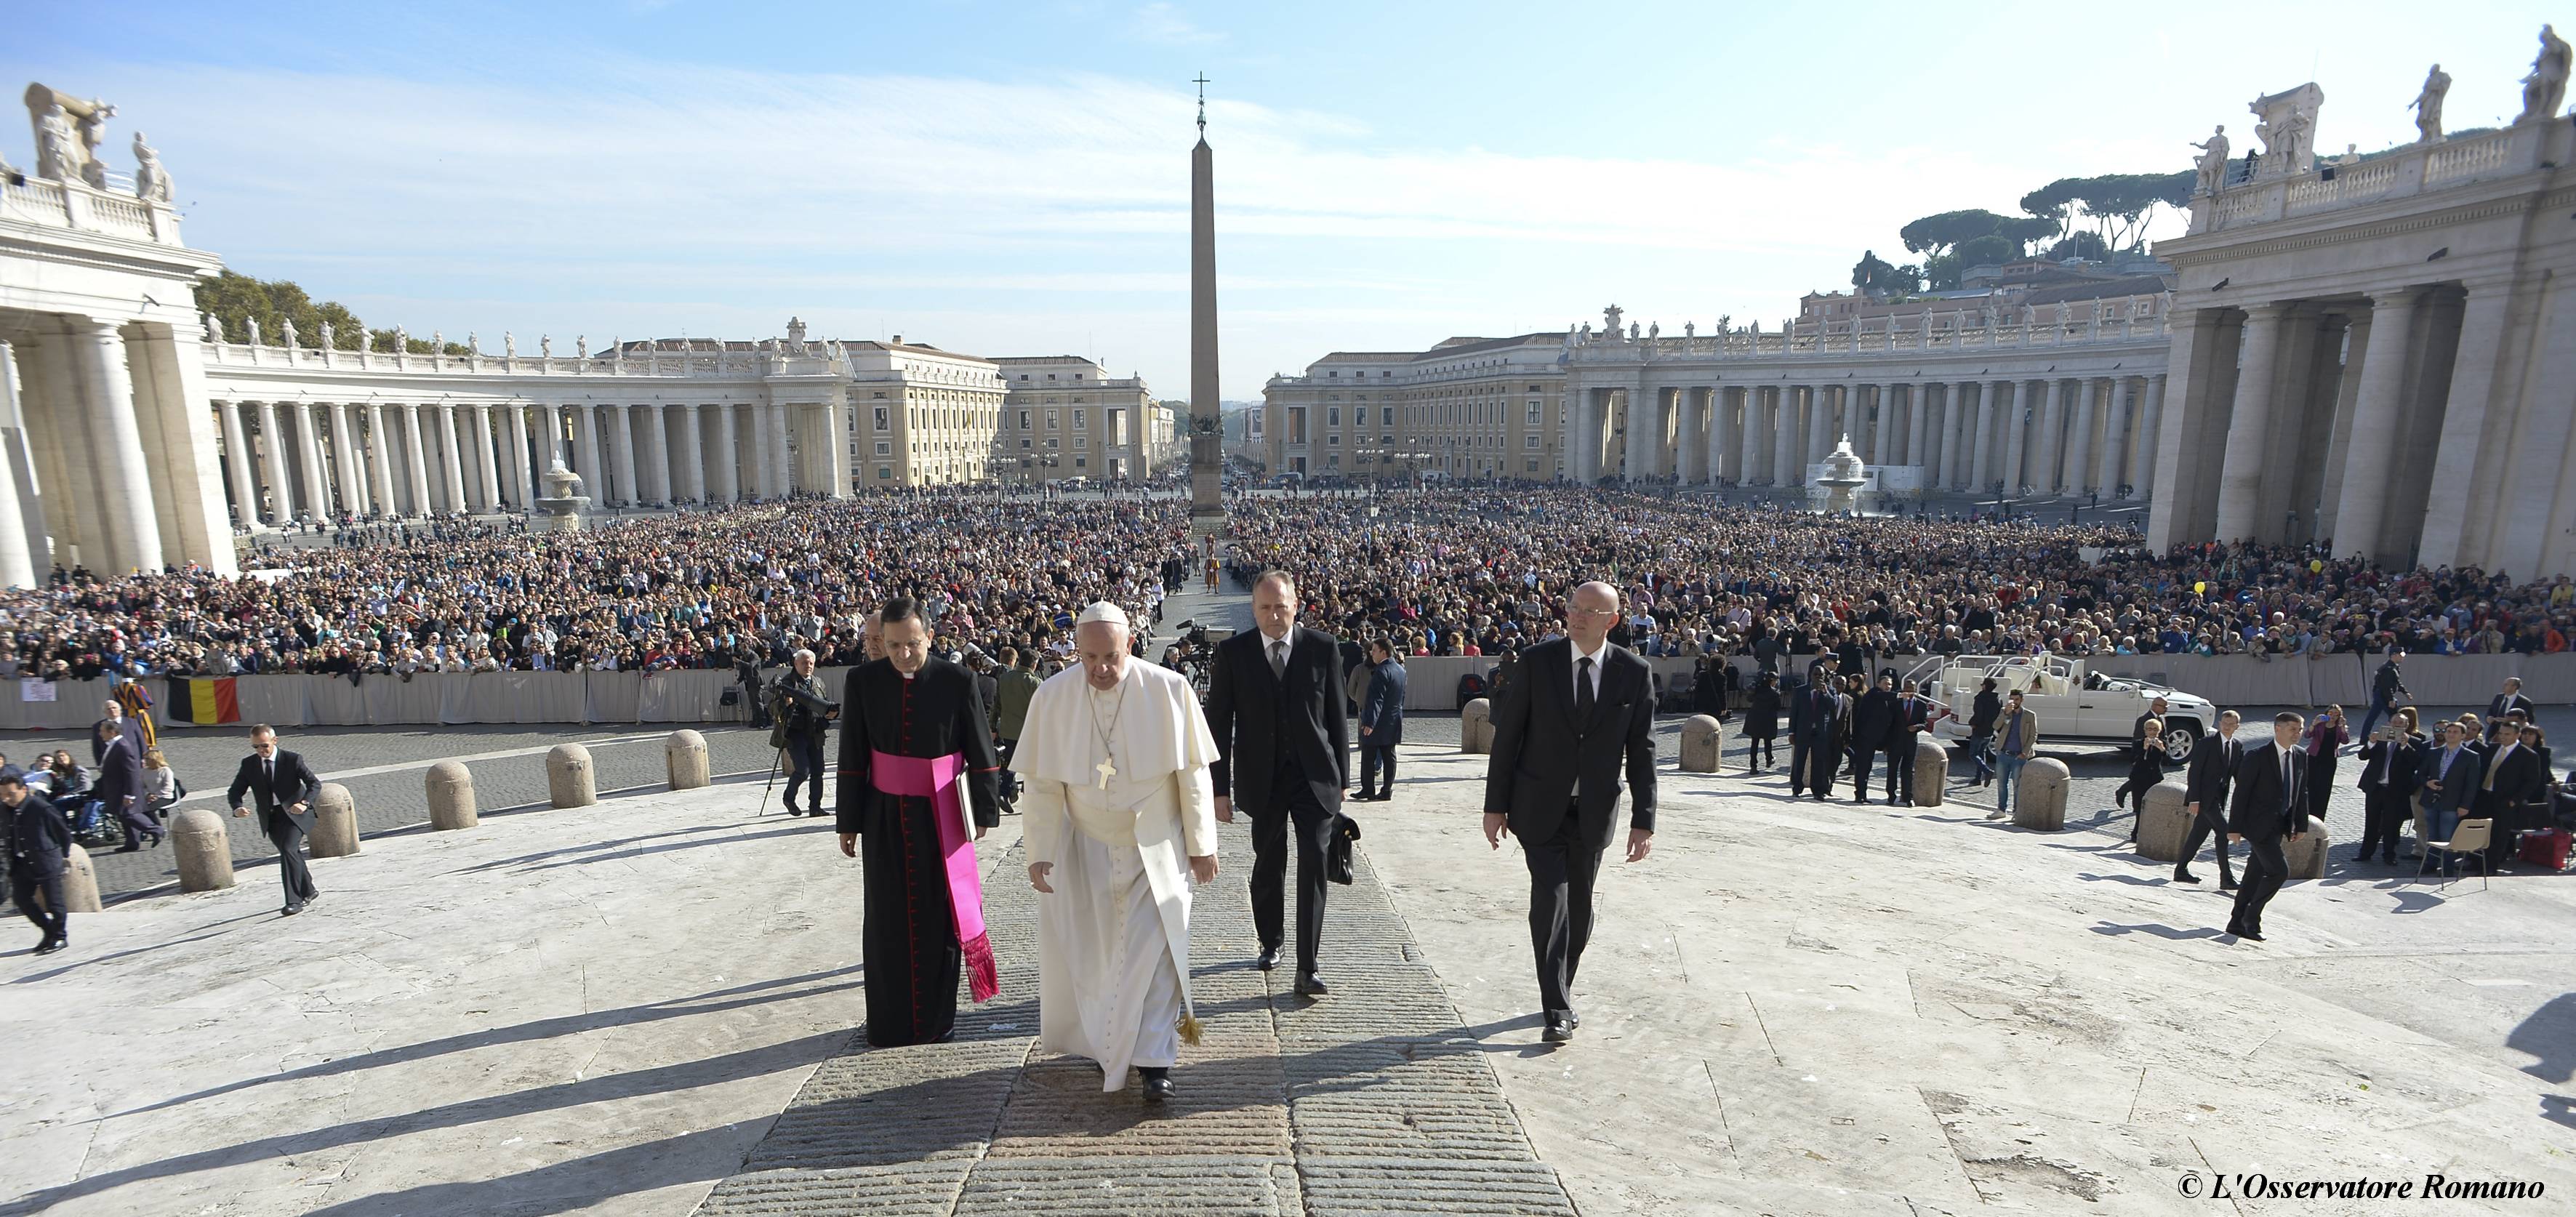 Pope Francis during his weekly general audience in St. Peter's Square